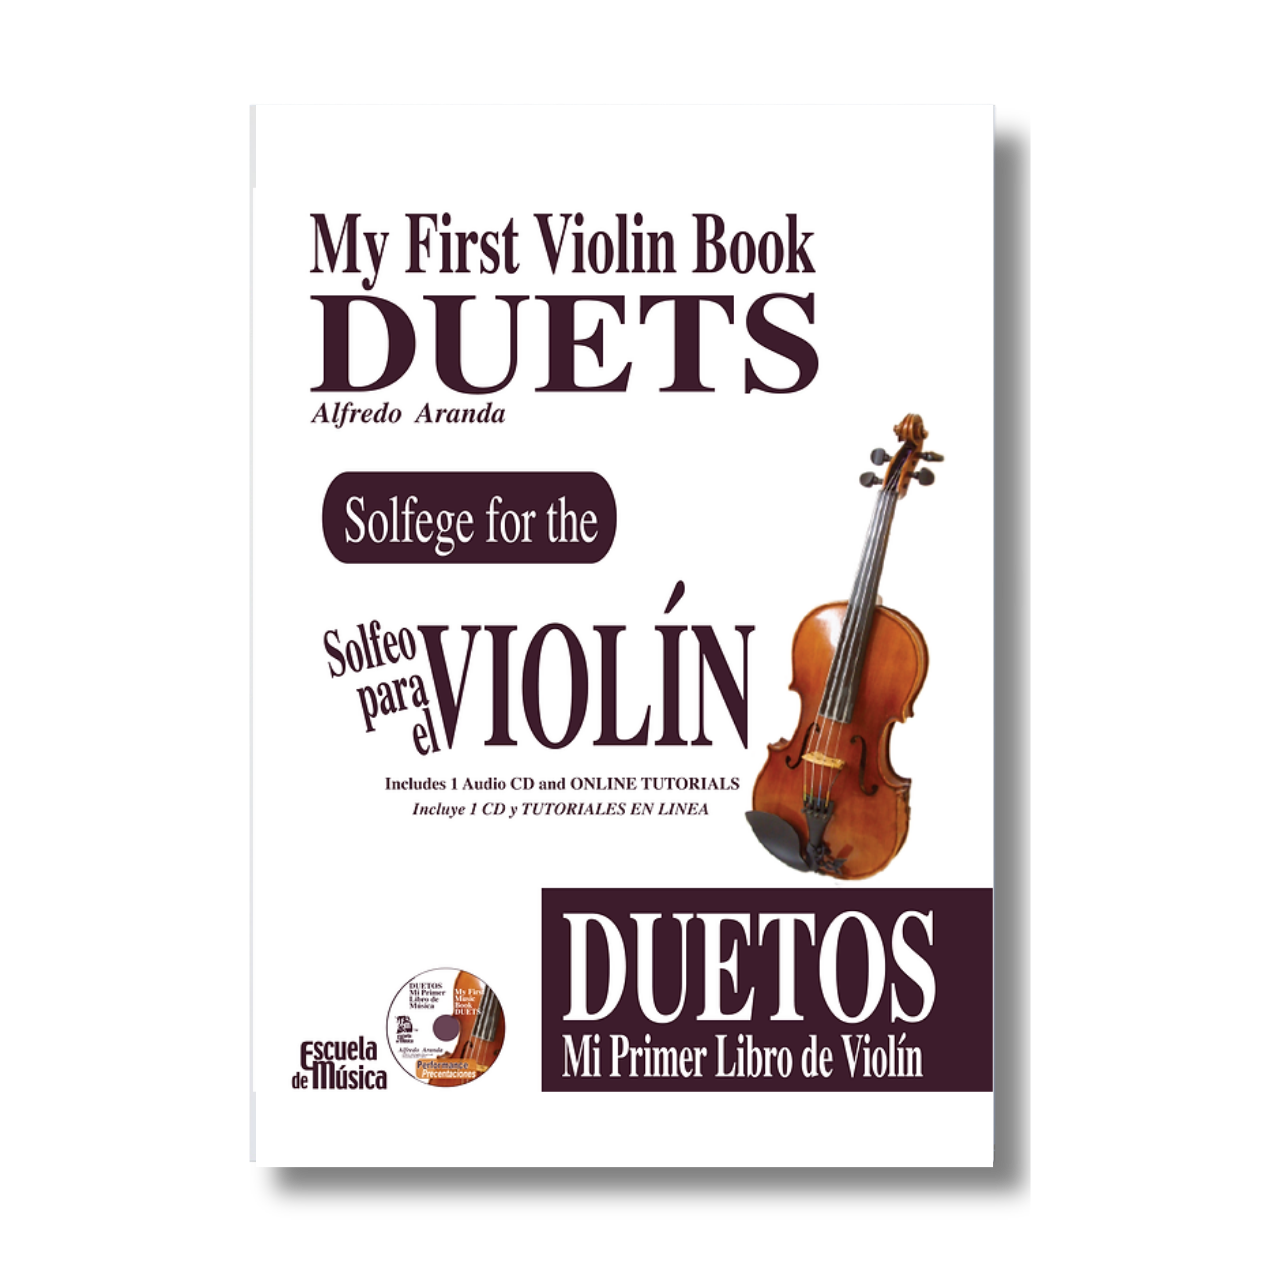 Book - My First Violin - DUETS